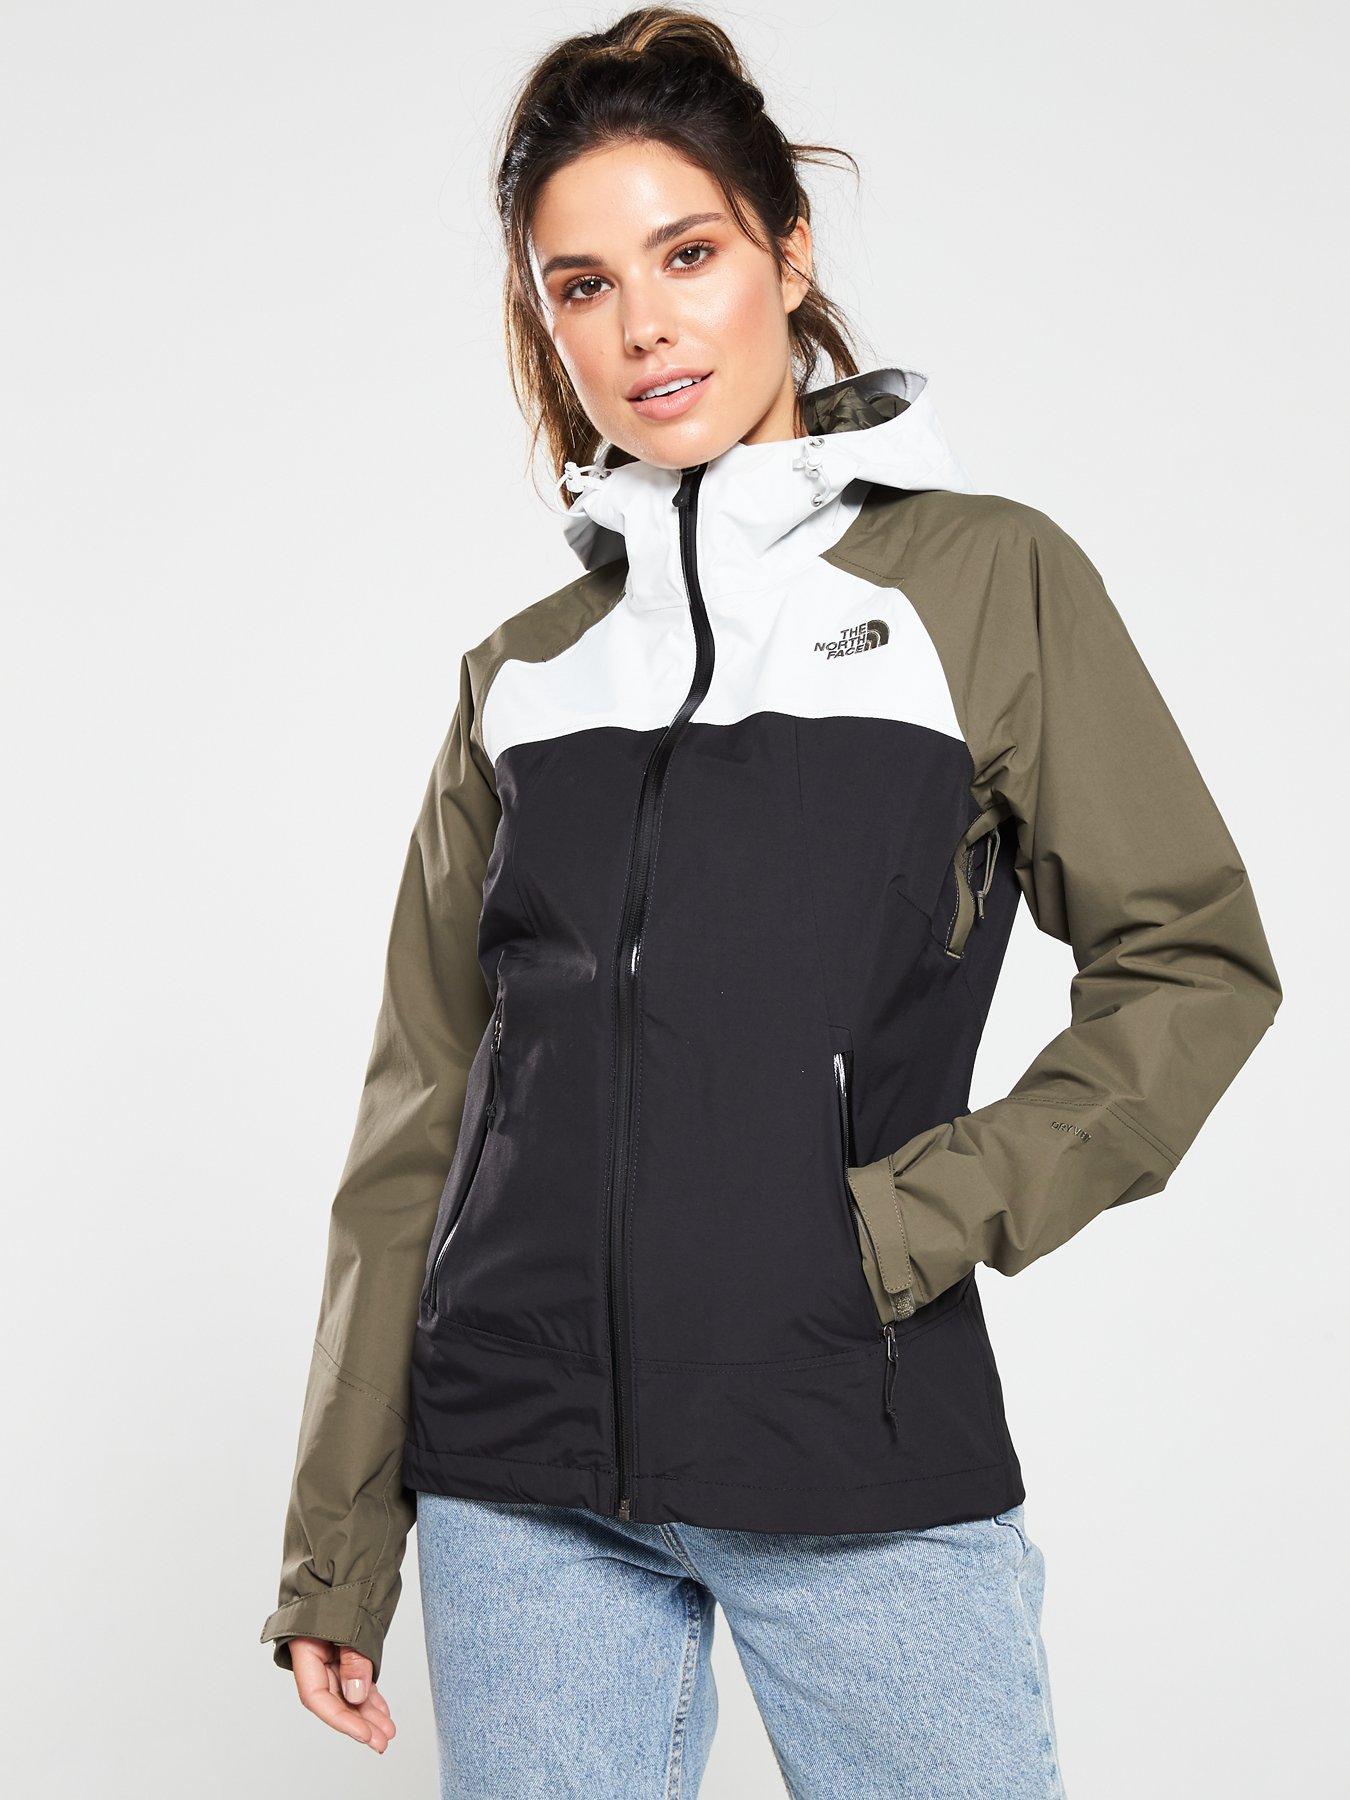 north face stratos jacket womens